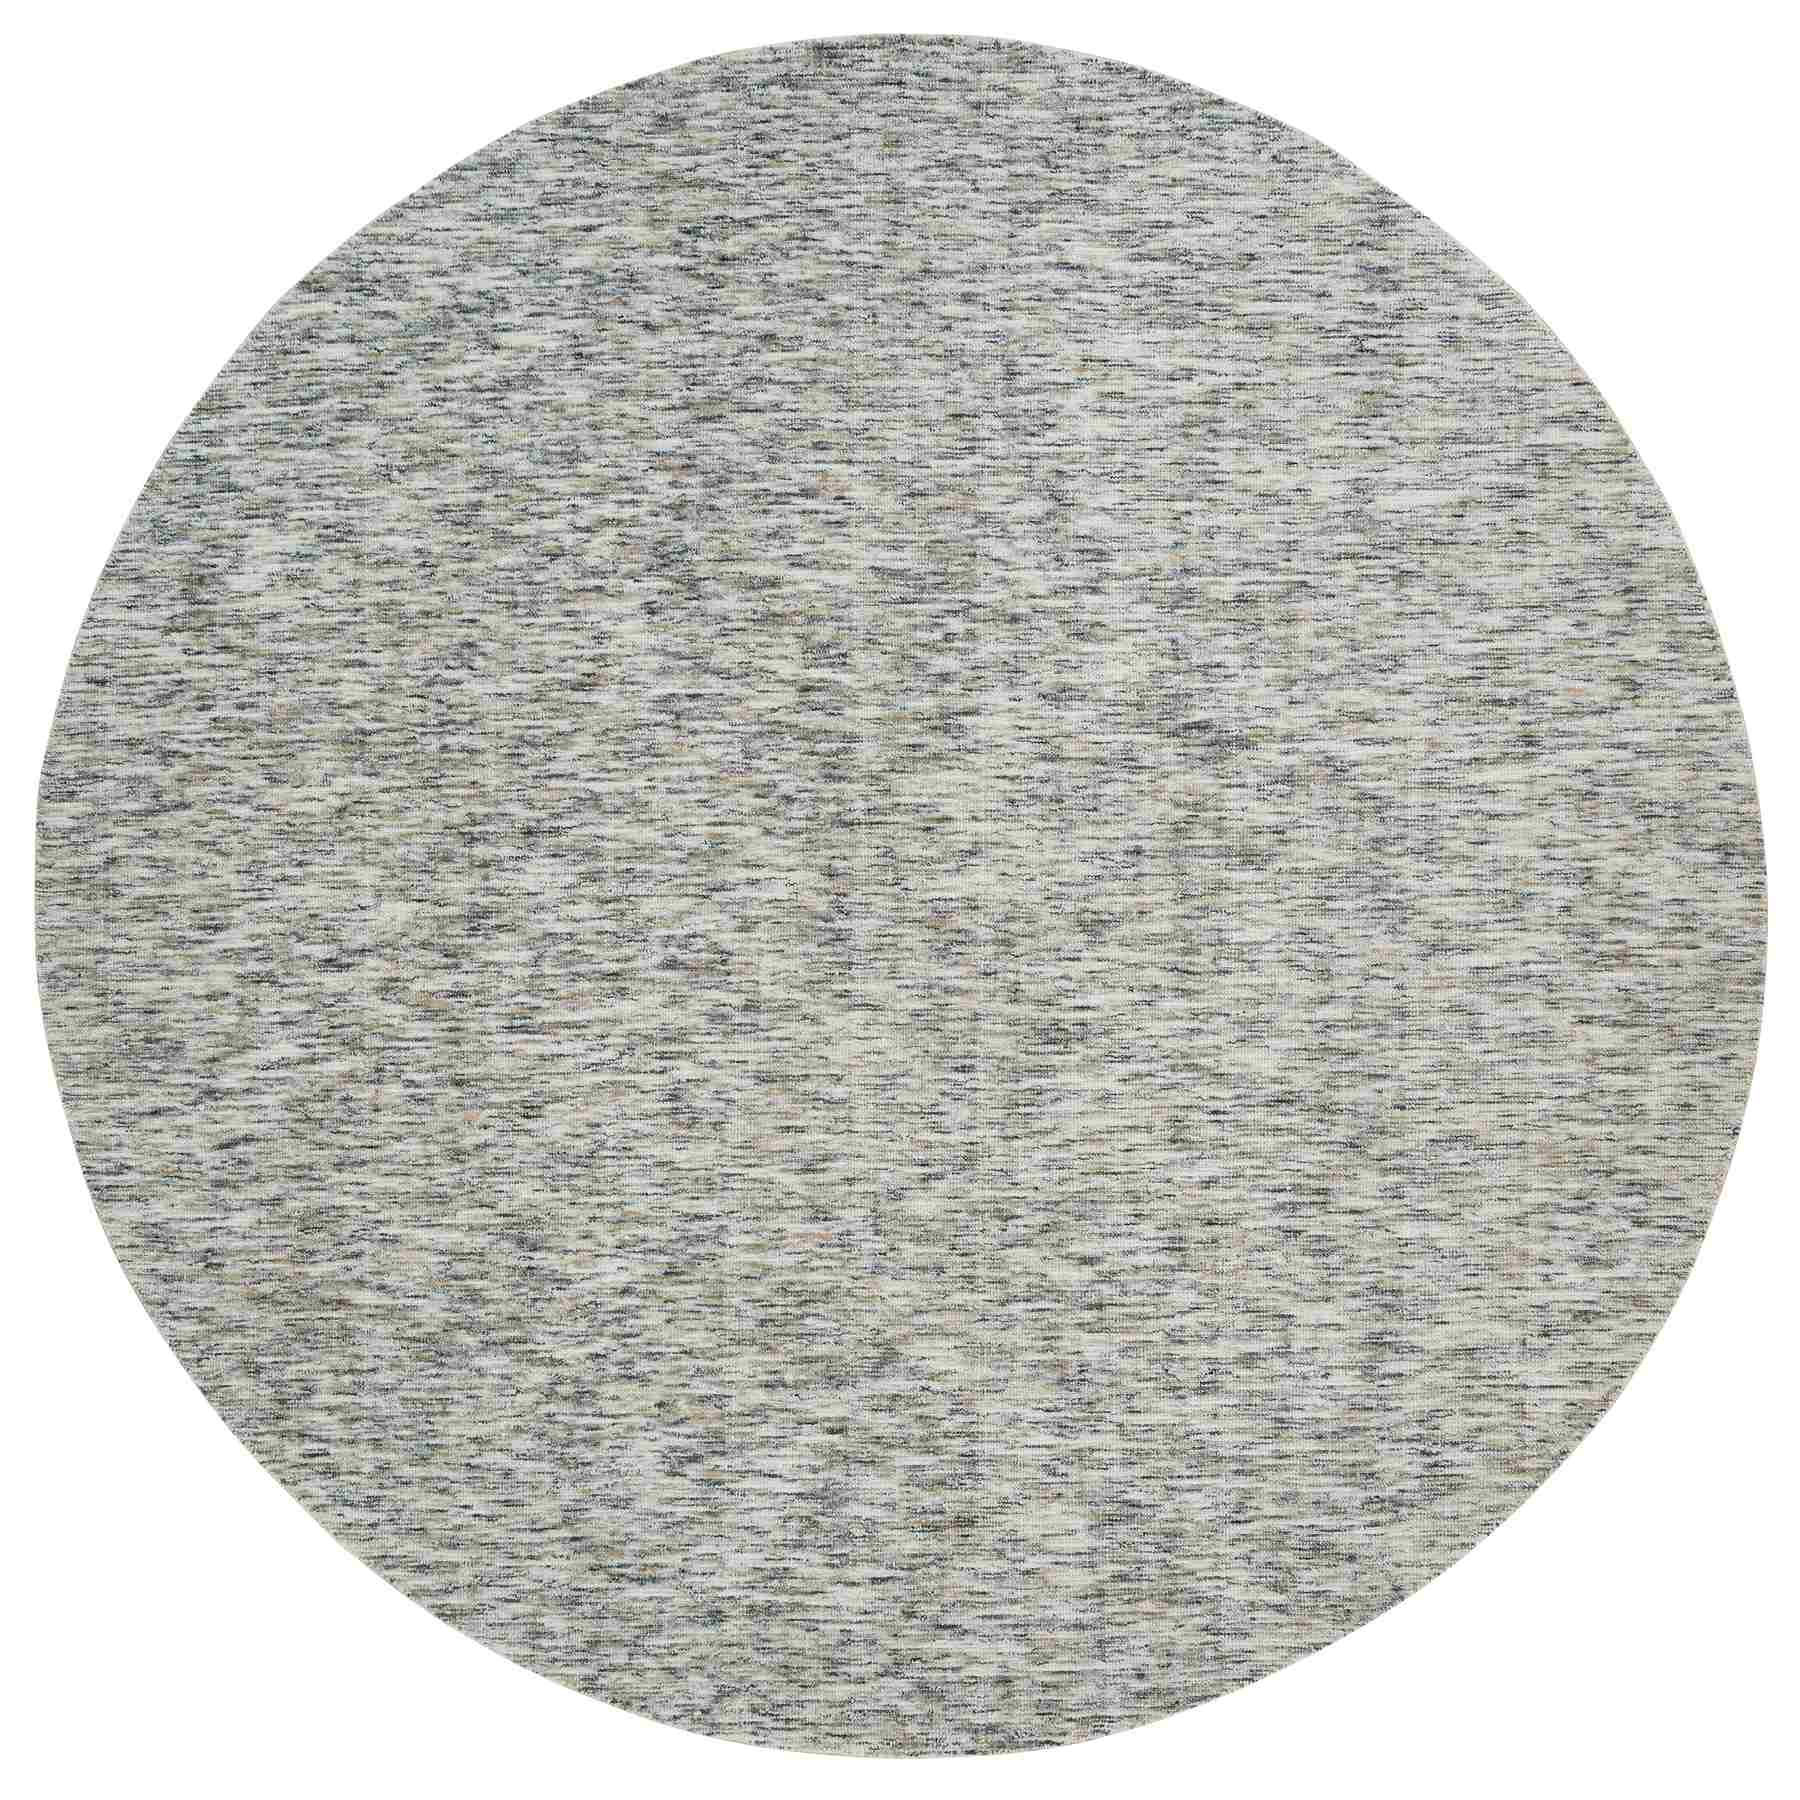 Earth Tone Colors, Modern Striae Design, Soft pile, Pure Wool, Hand Loomed, Round Oriental Rug